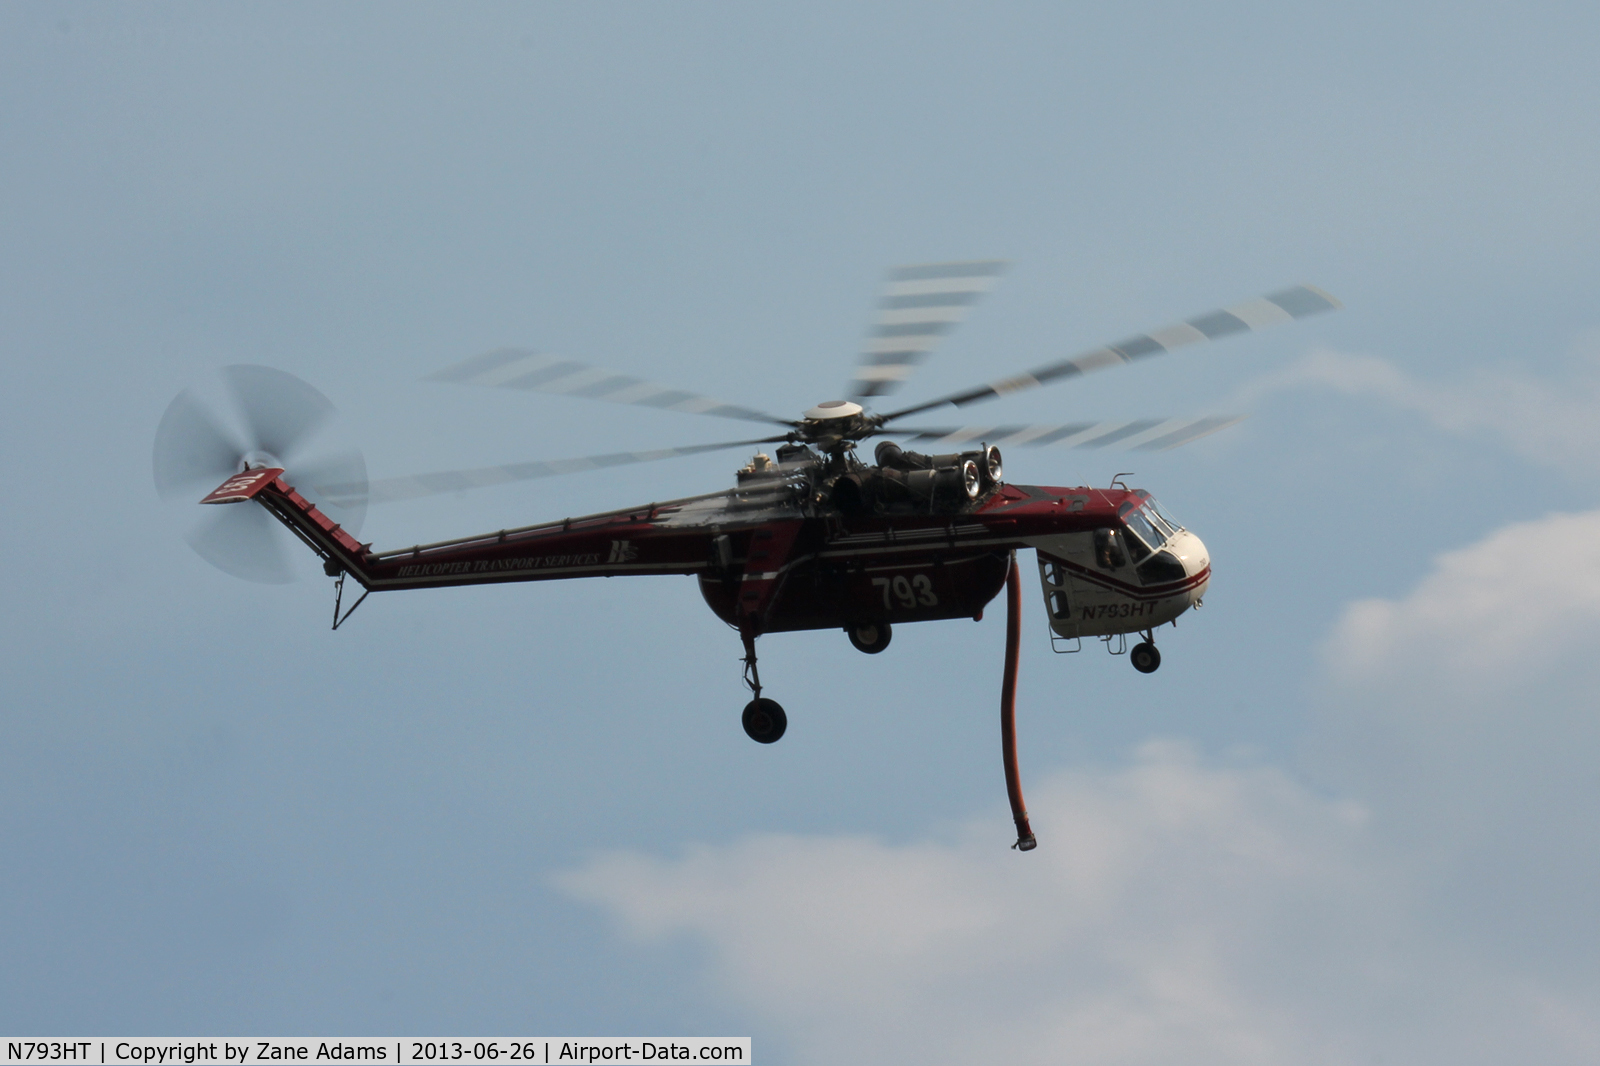 N793HT, Sikorsky S64 C/N 67-18427, Working the Jaroso Fire in the Pecos Wilderness.